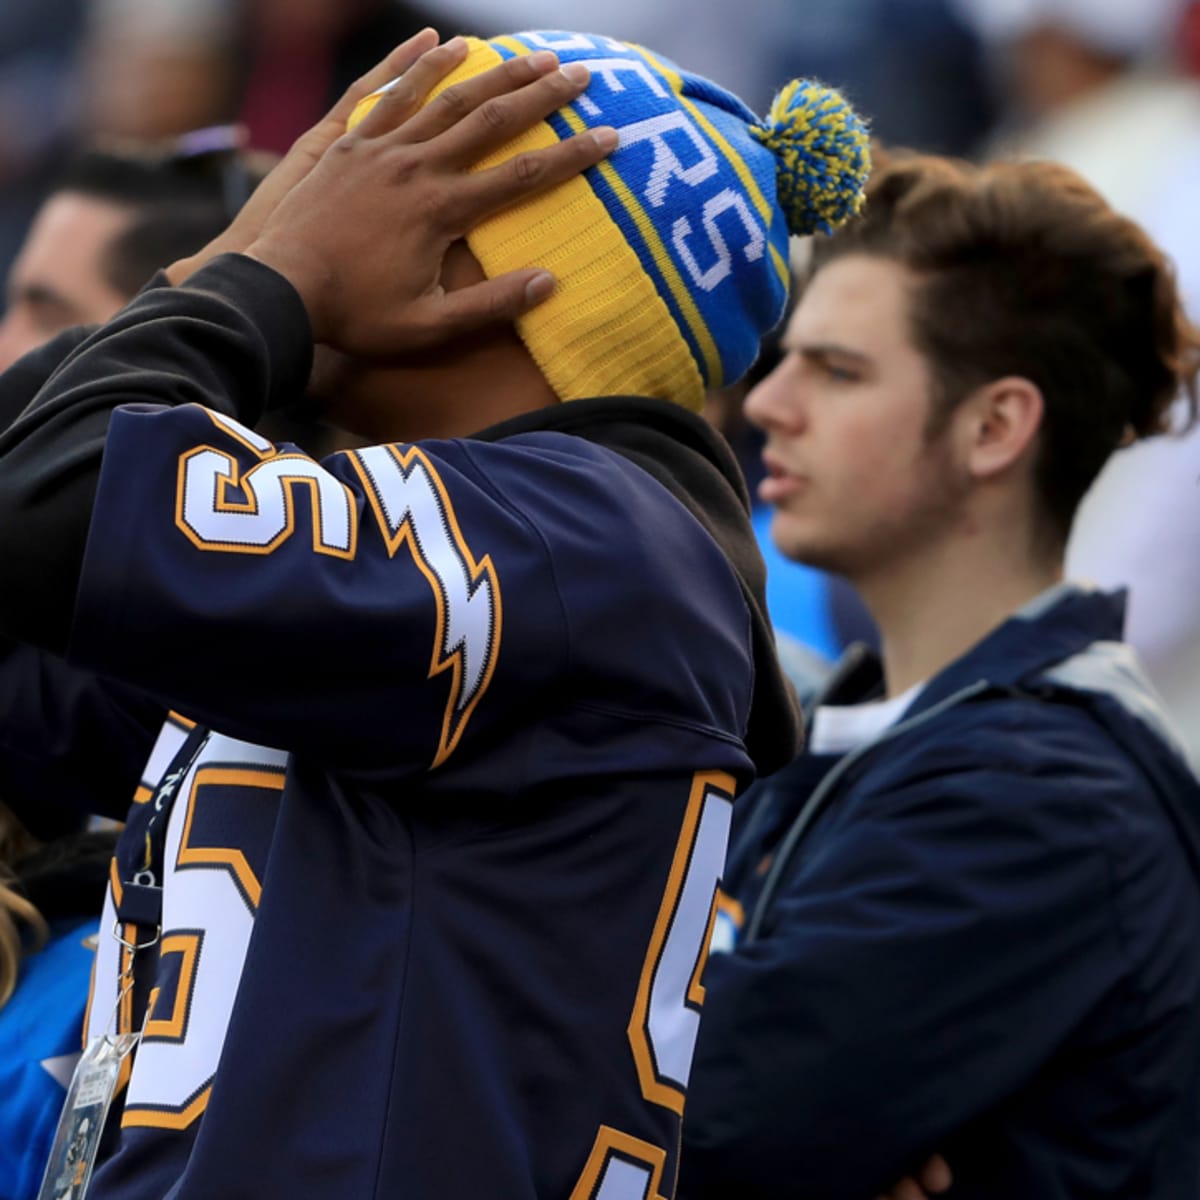 LA Gear challenges 'LA' trademarks of Rams, Chargers